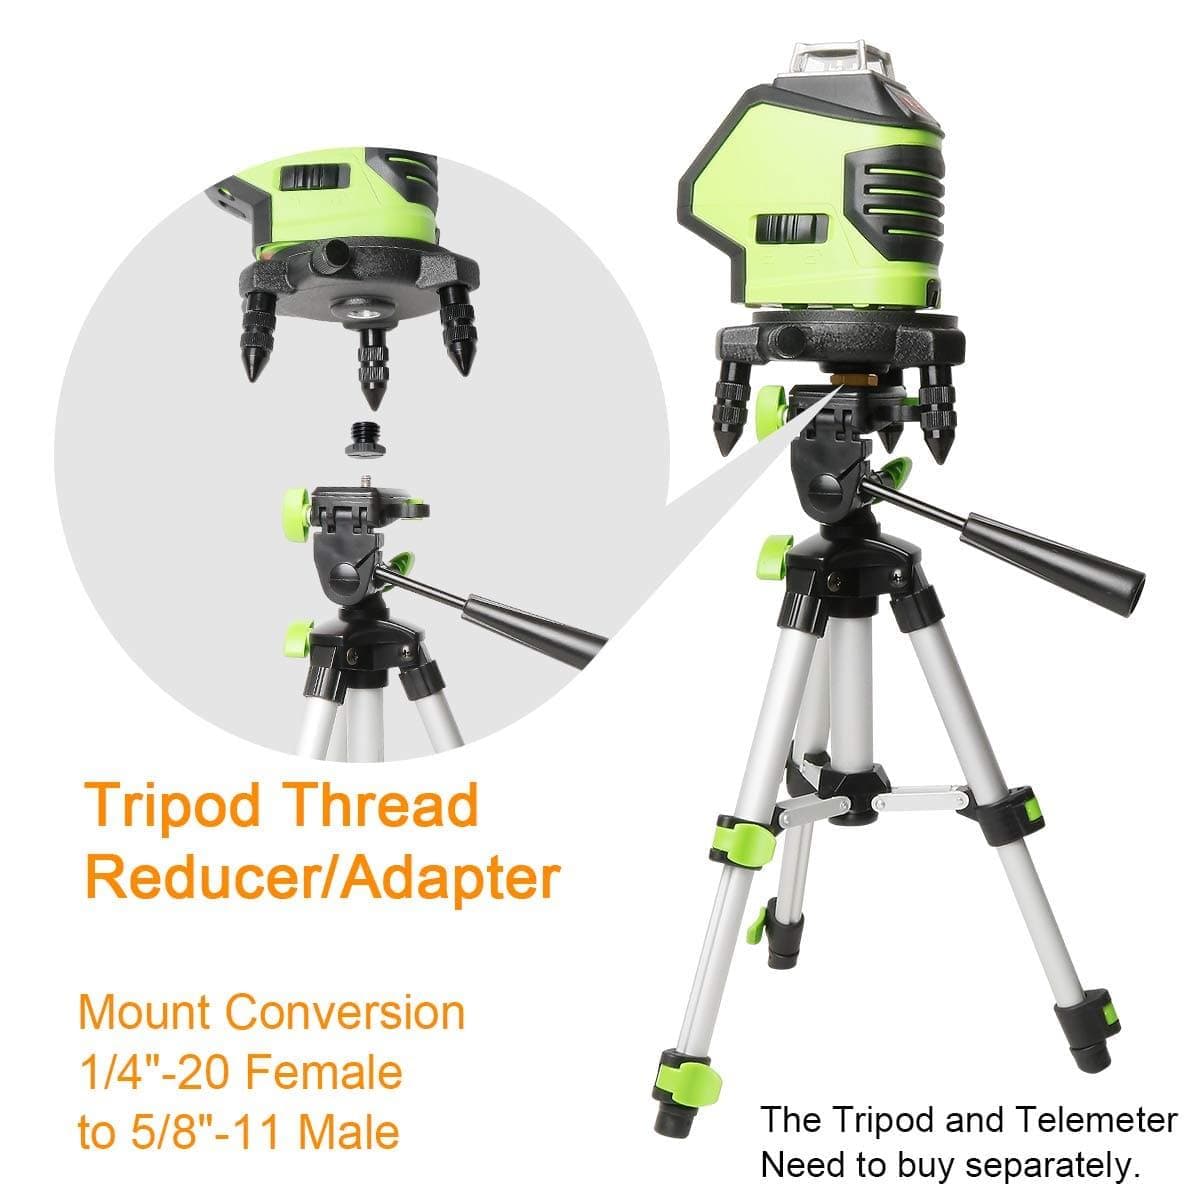 HUEPAR Adapter with 1/4 inch to 5/8 inch thread conversion for tripods and laser levels with free shipping in the US1